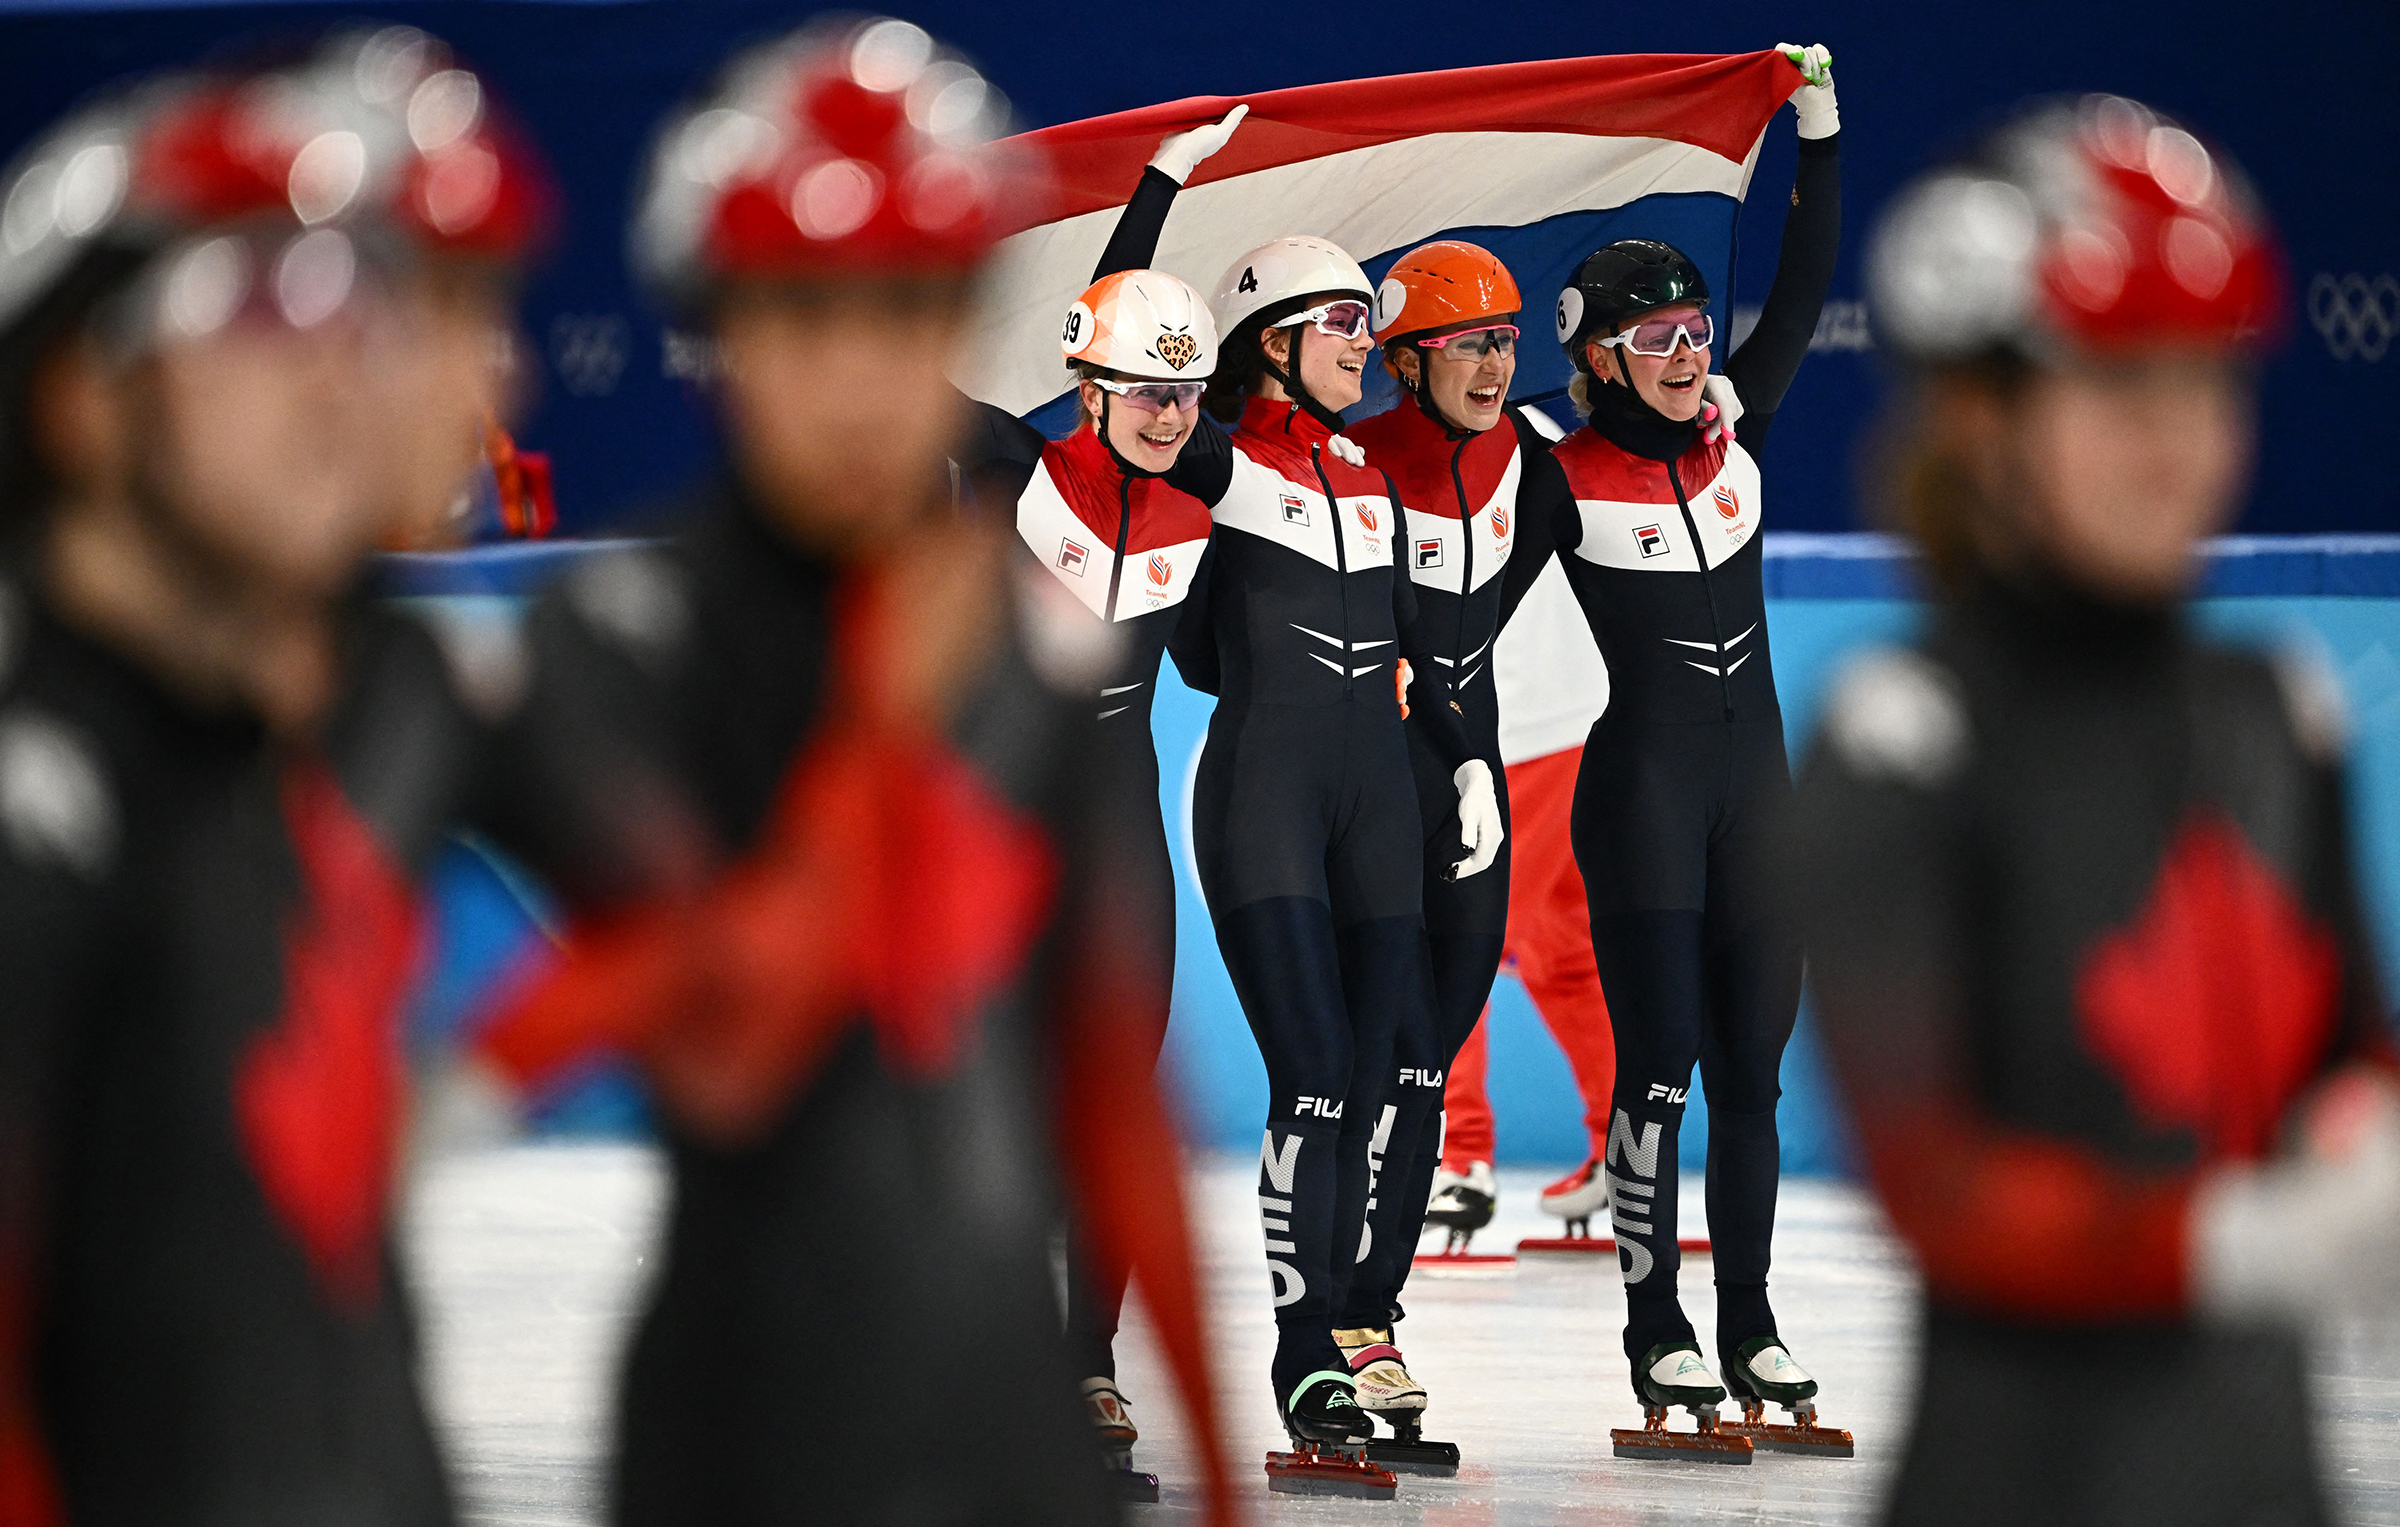 The Netherlands' team celebrates winning the women's 3,000m relay short track speed skating relay on February 13. 